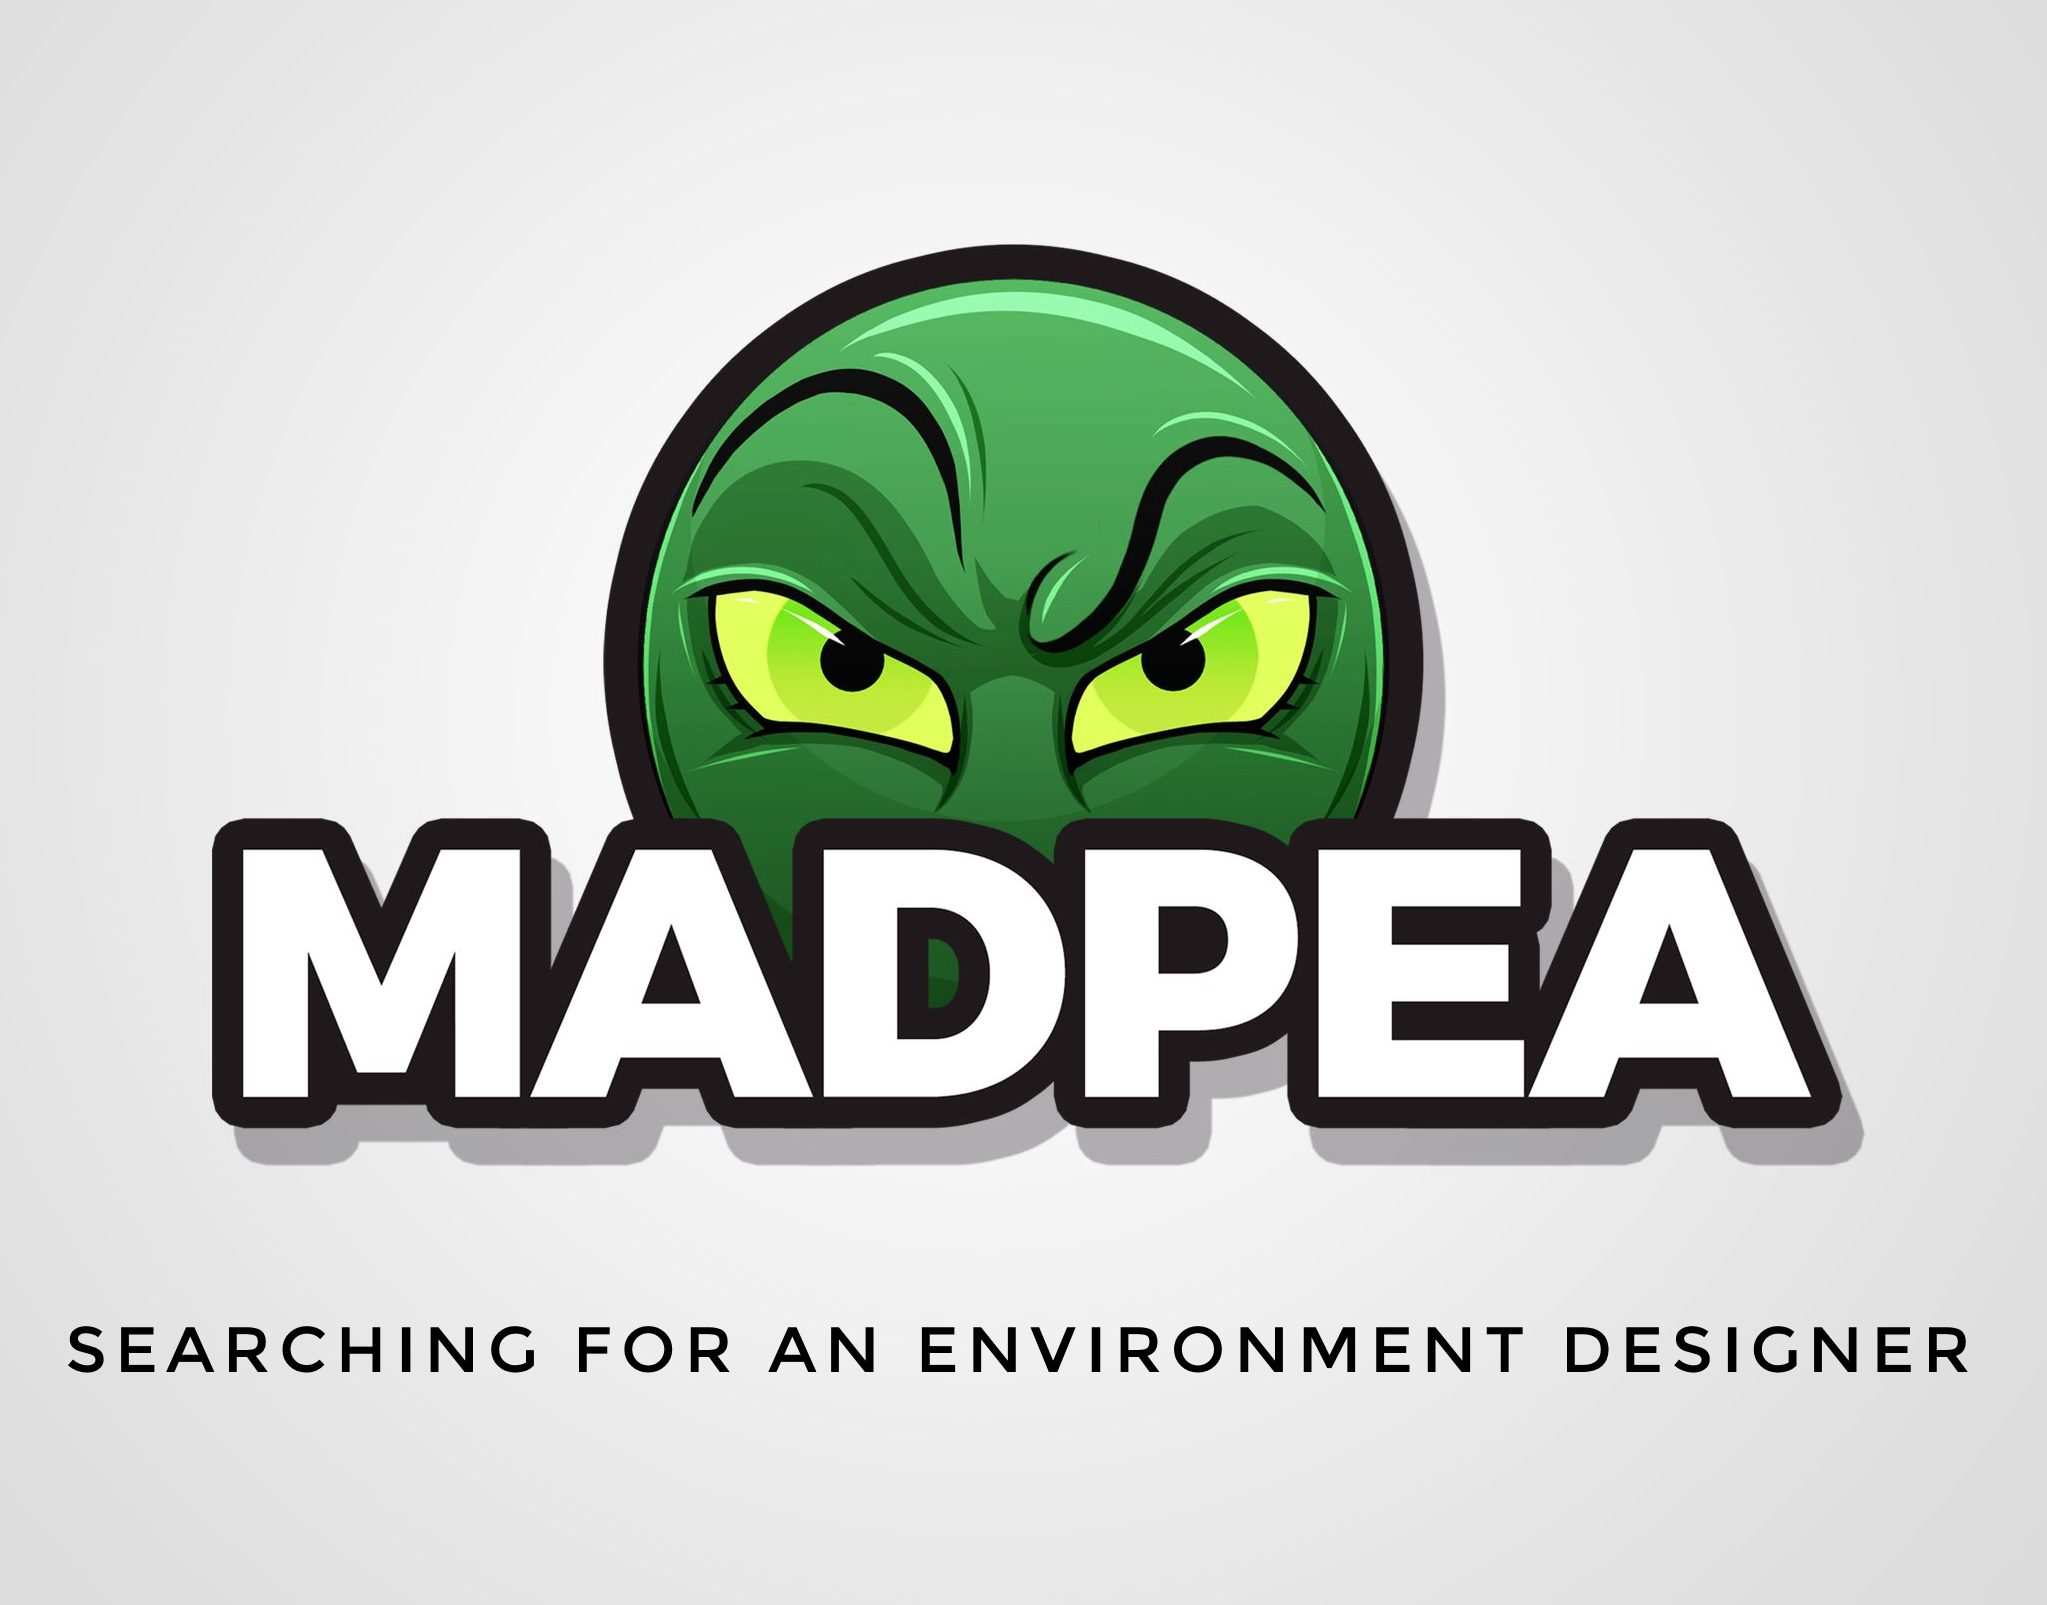 MadPea – Searching For An Environment Designer